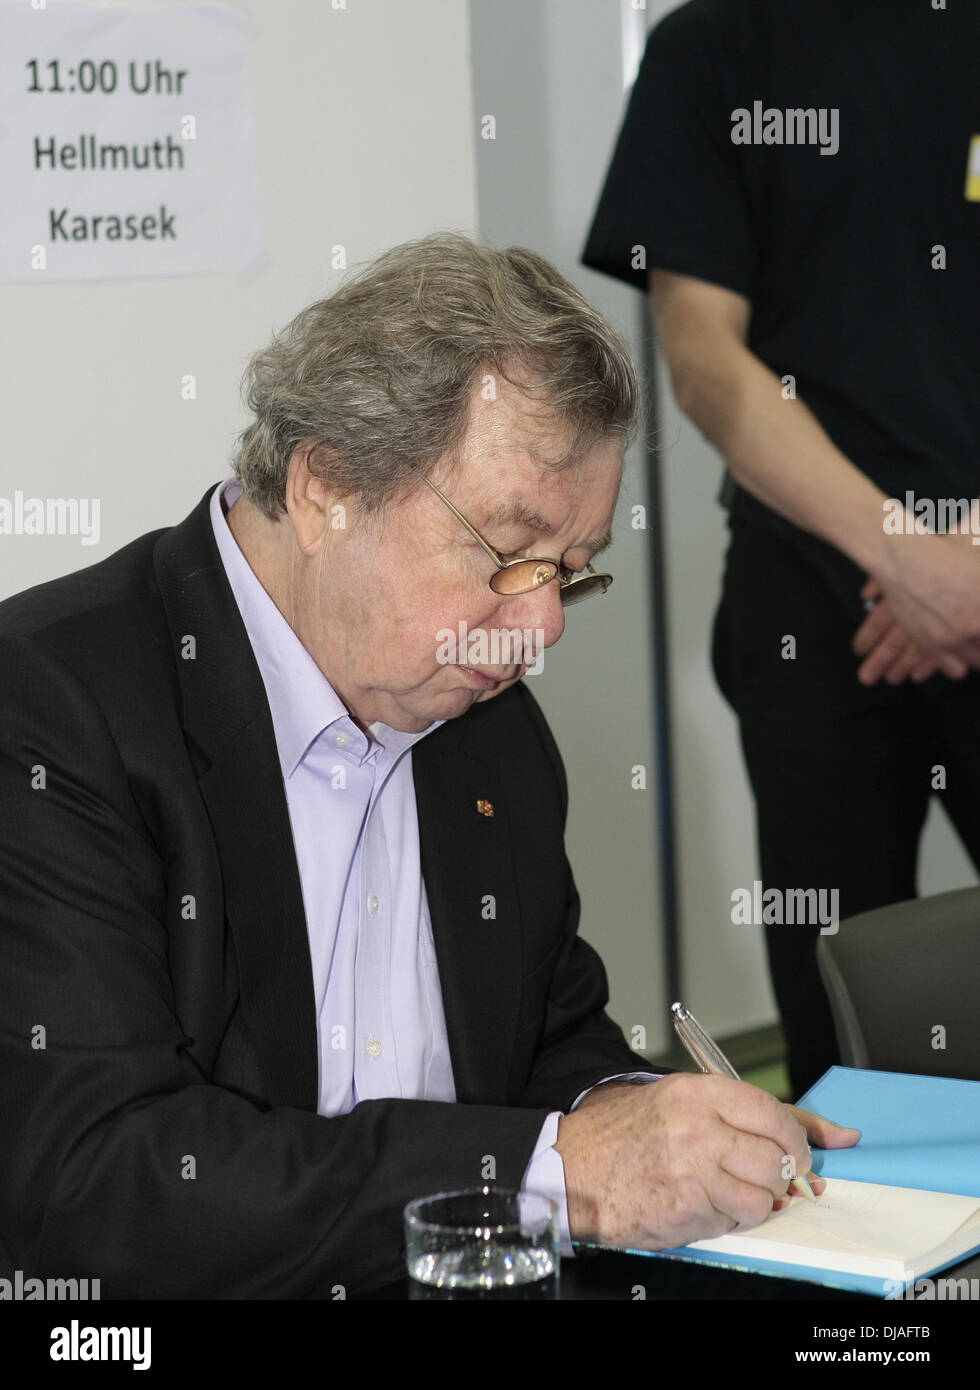 Hellmuth Karasek signing autographs for the launch of his book 'Soll das ein Witz sein?' at Leipziger Buchmesse book fair. Leipzig, Germany - 18.03.2012 Stock Photo